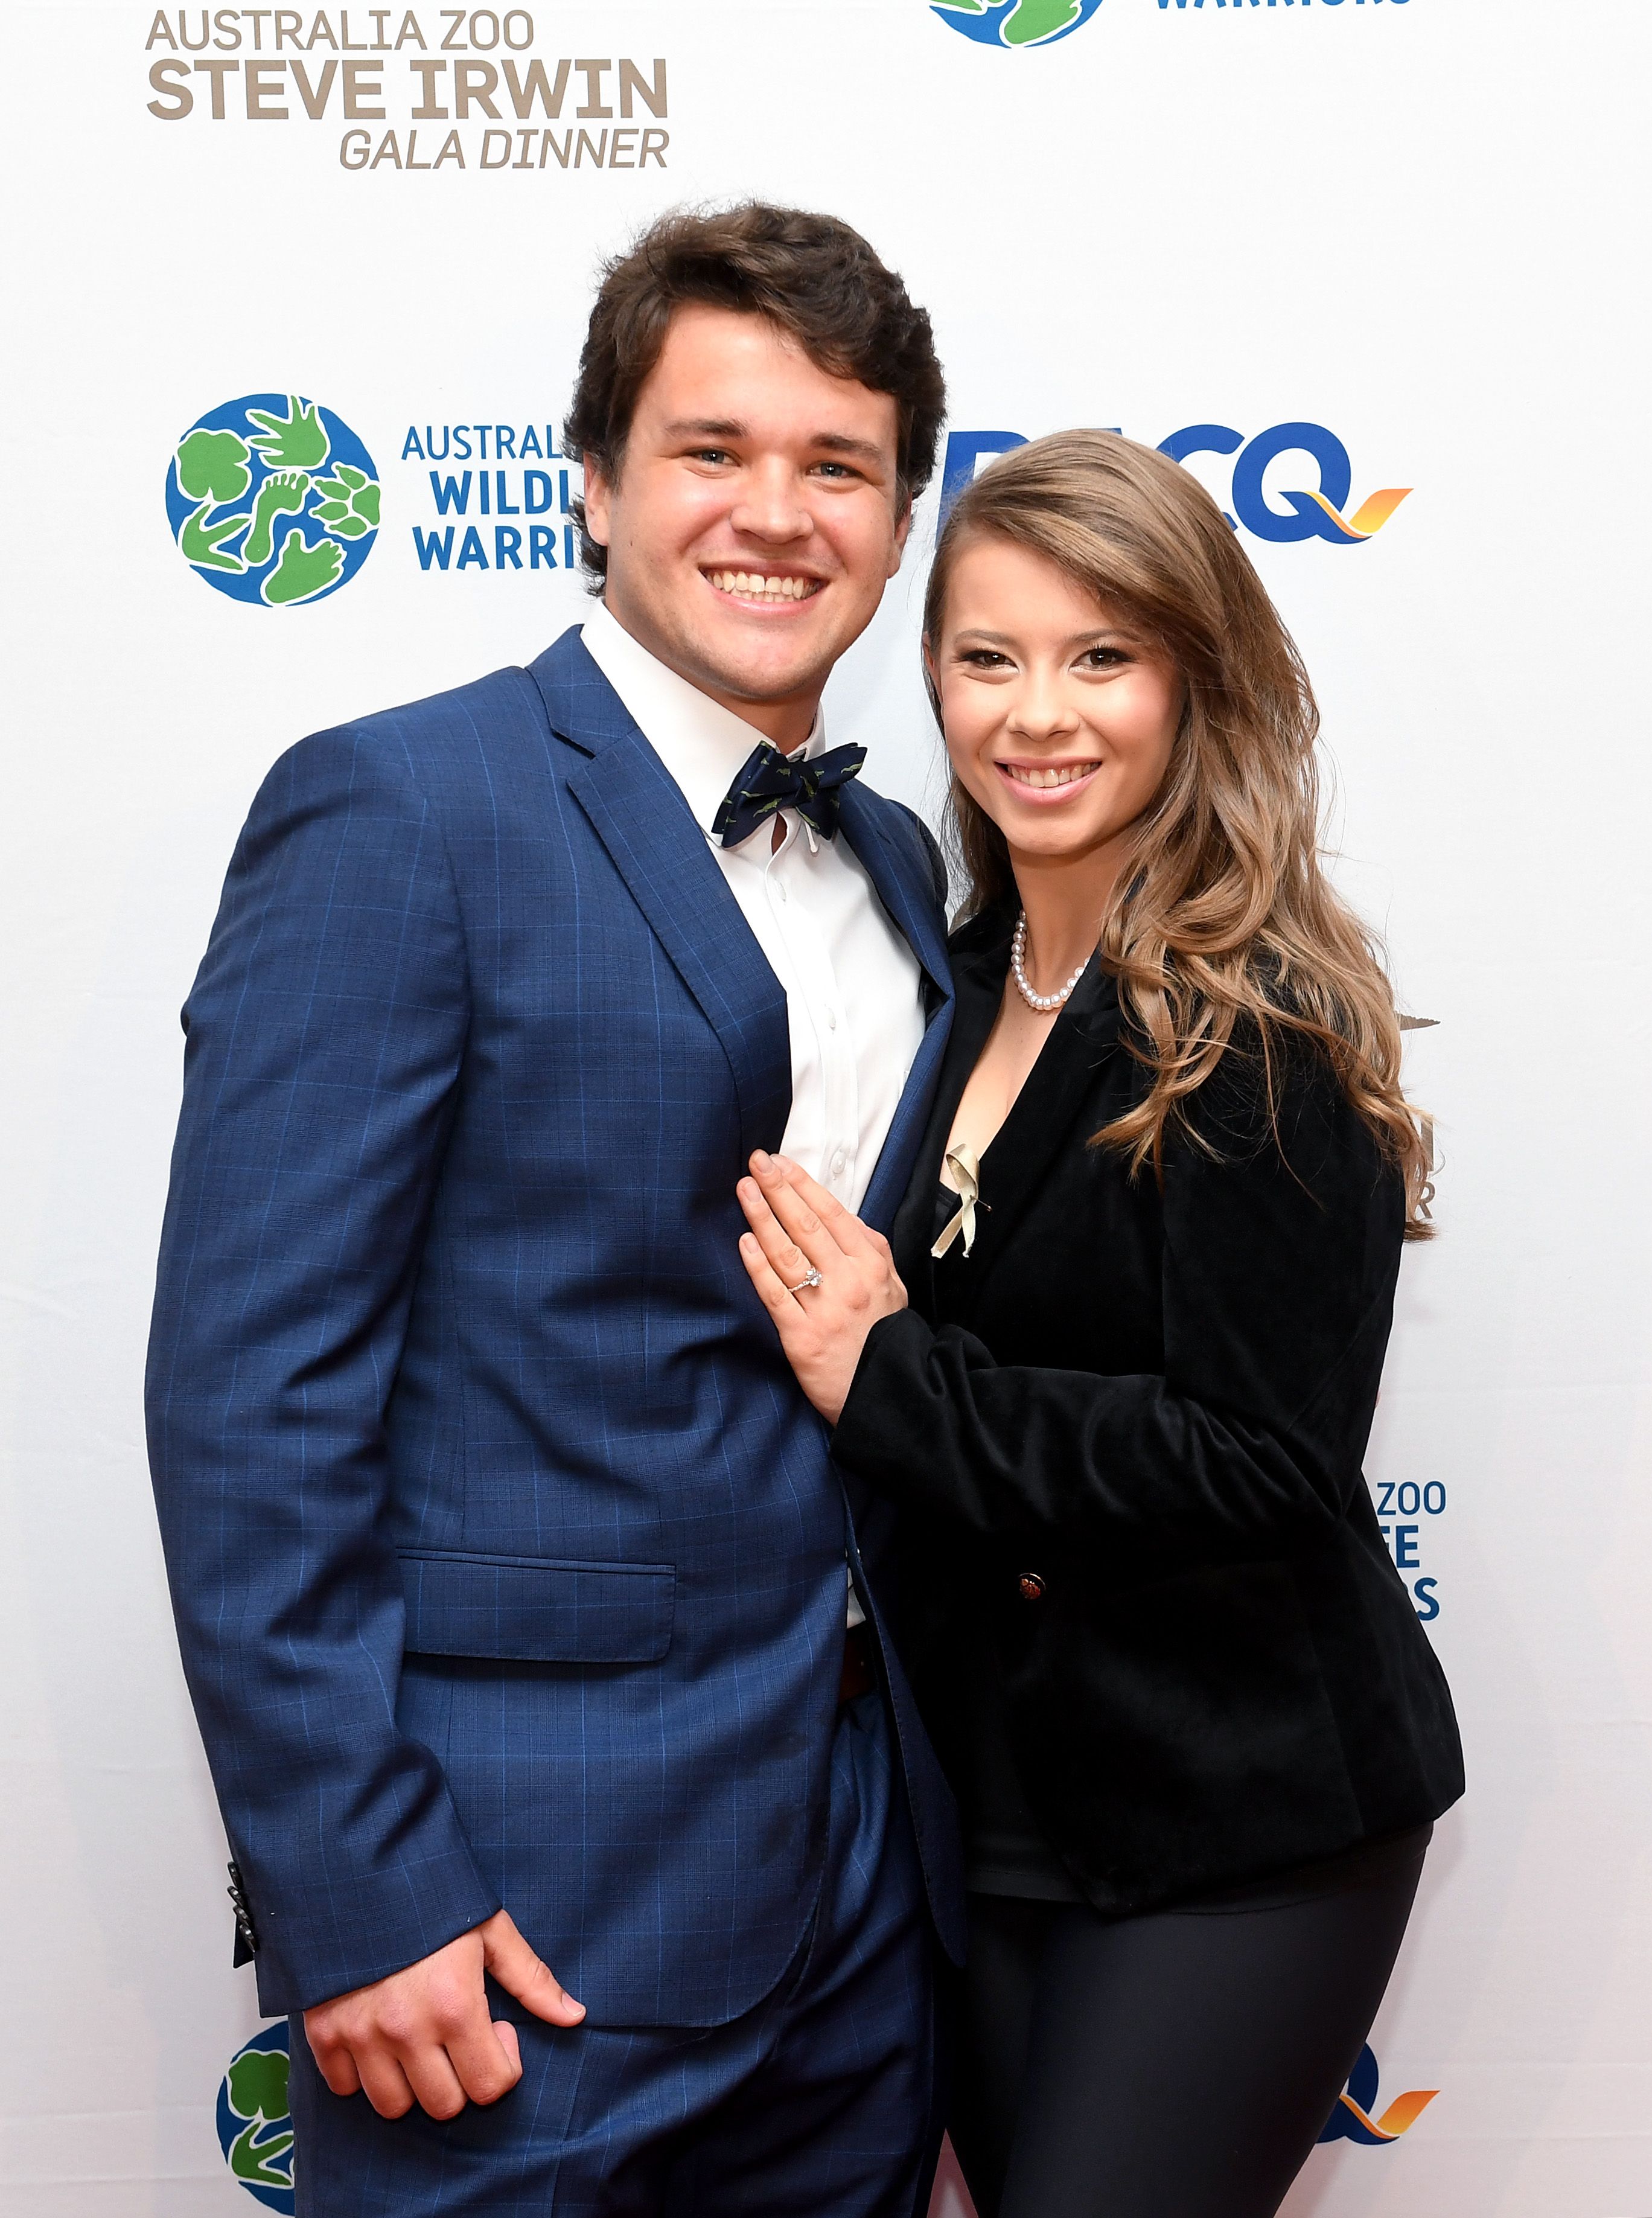 Bindi Irwin and Chandler Powell at the annual Steve Irwin Gala Dinner at Brisbane Convention & Exhibition Centre on November 09, 2019 in Brisbane, Australia. | Photo: Getty Images